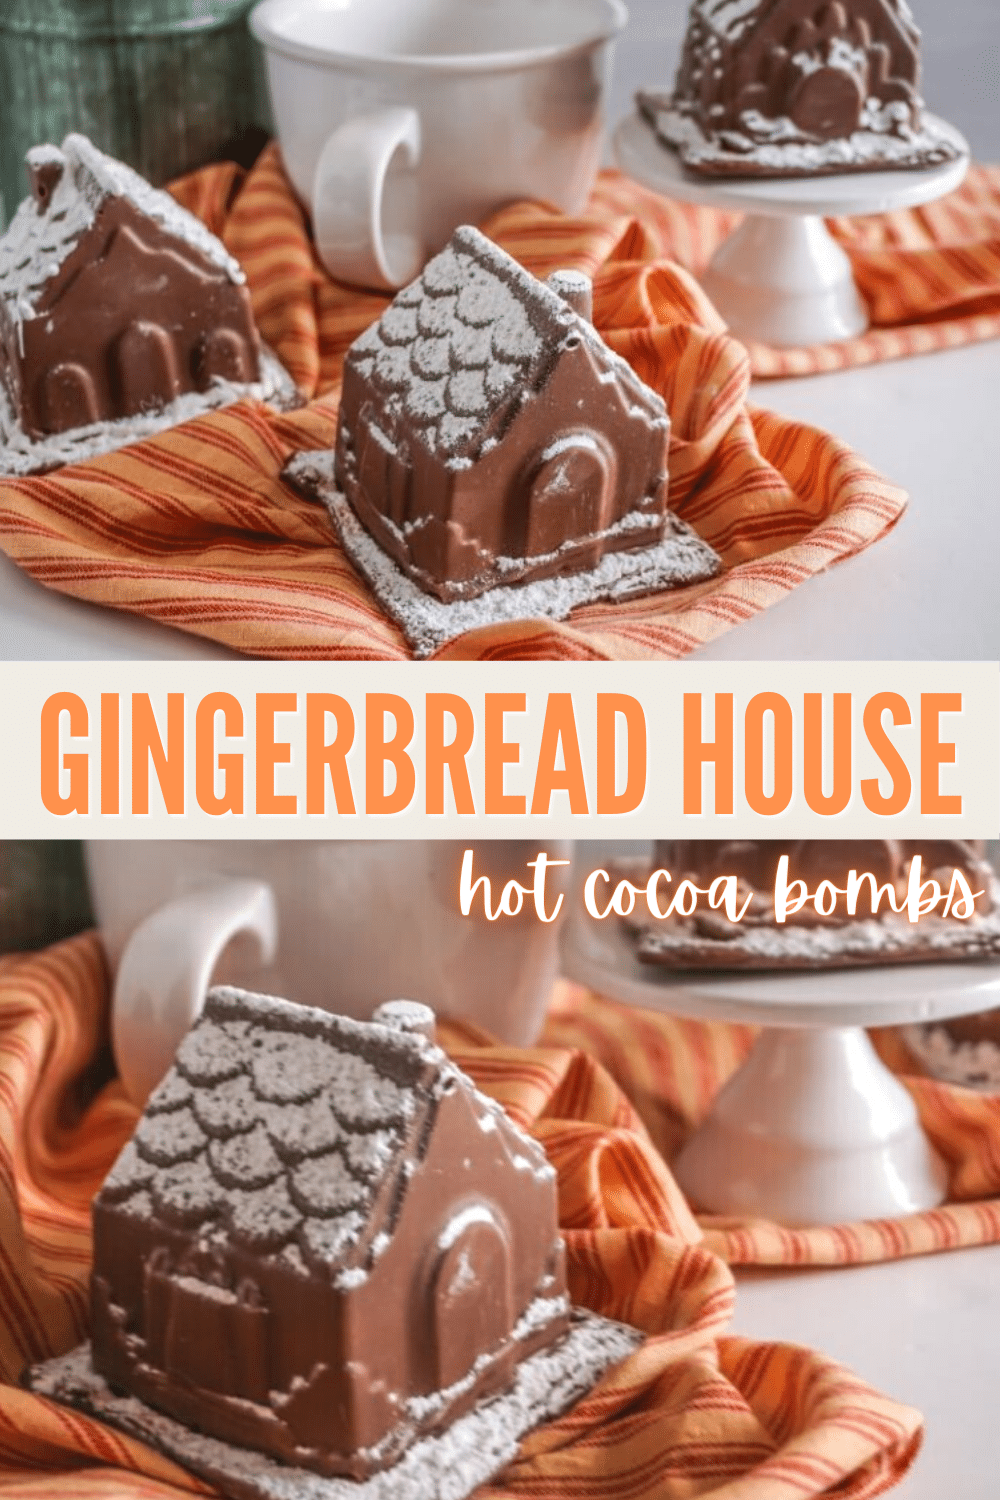 These Gingerbread House Hot Cocoa Bombs are unlike any cocoa bomb you're ever seen! So simple and delicious! #hotcocoabombs #hotcocoa #gingerbreadhouse #christmas via @wondermomwannab